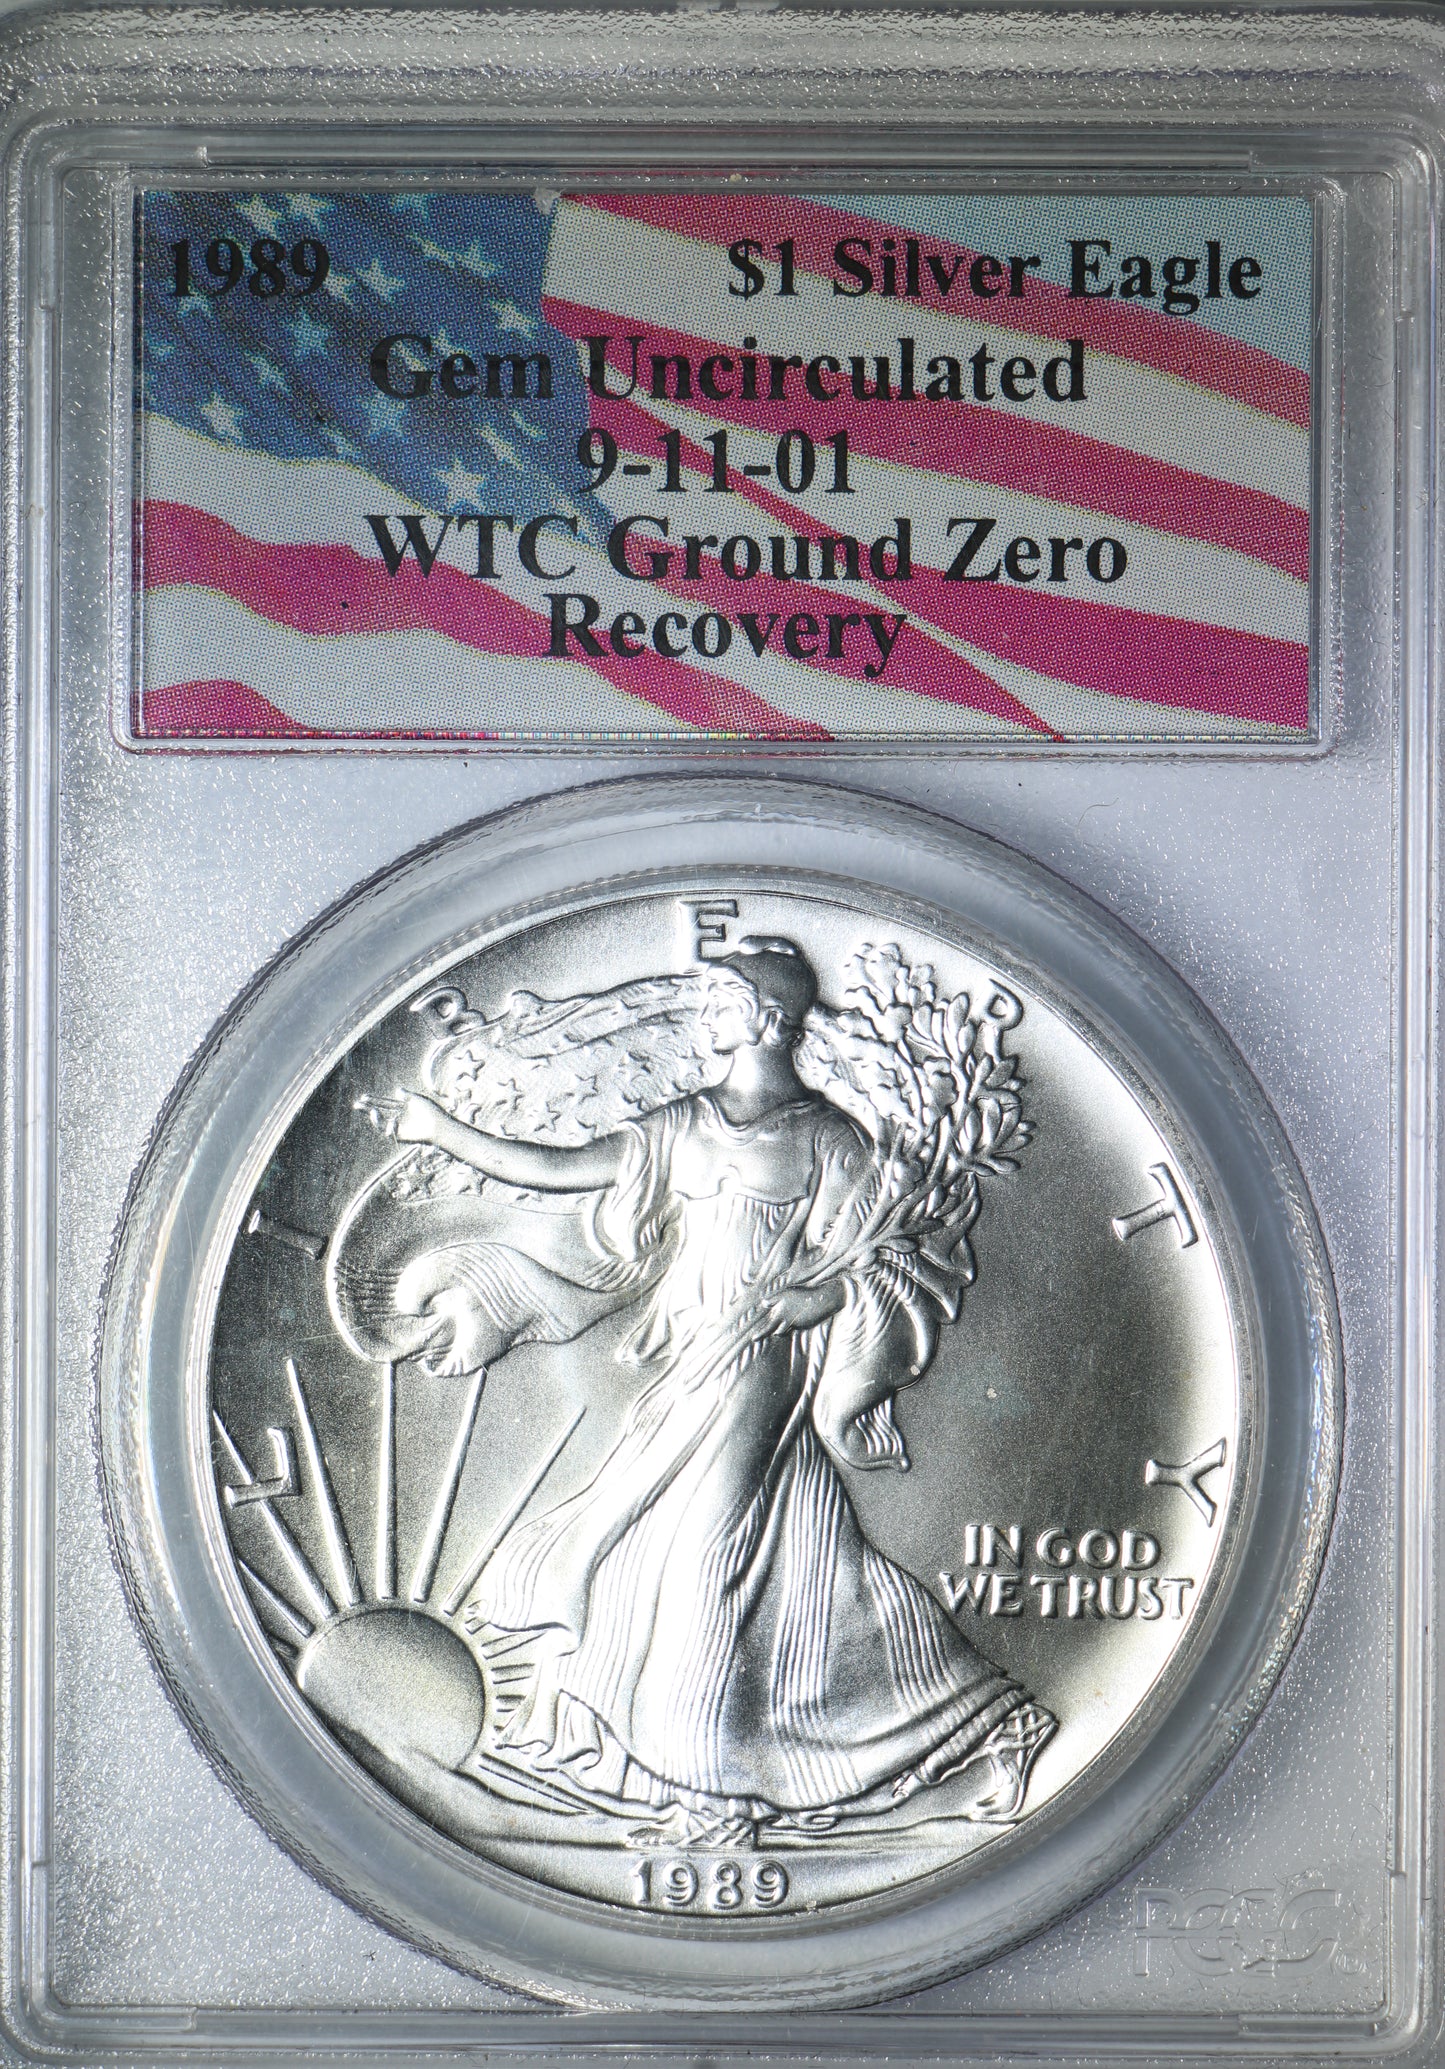 1989 Gem Uncirculated American Silver Eagle WTC Ground Zero Recovery 9-11-01